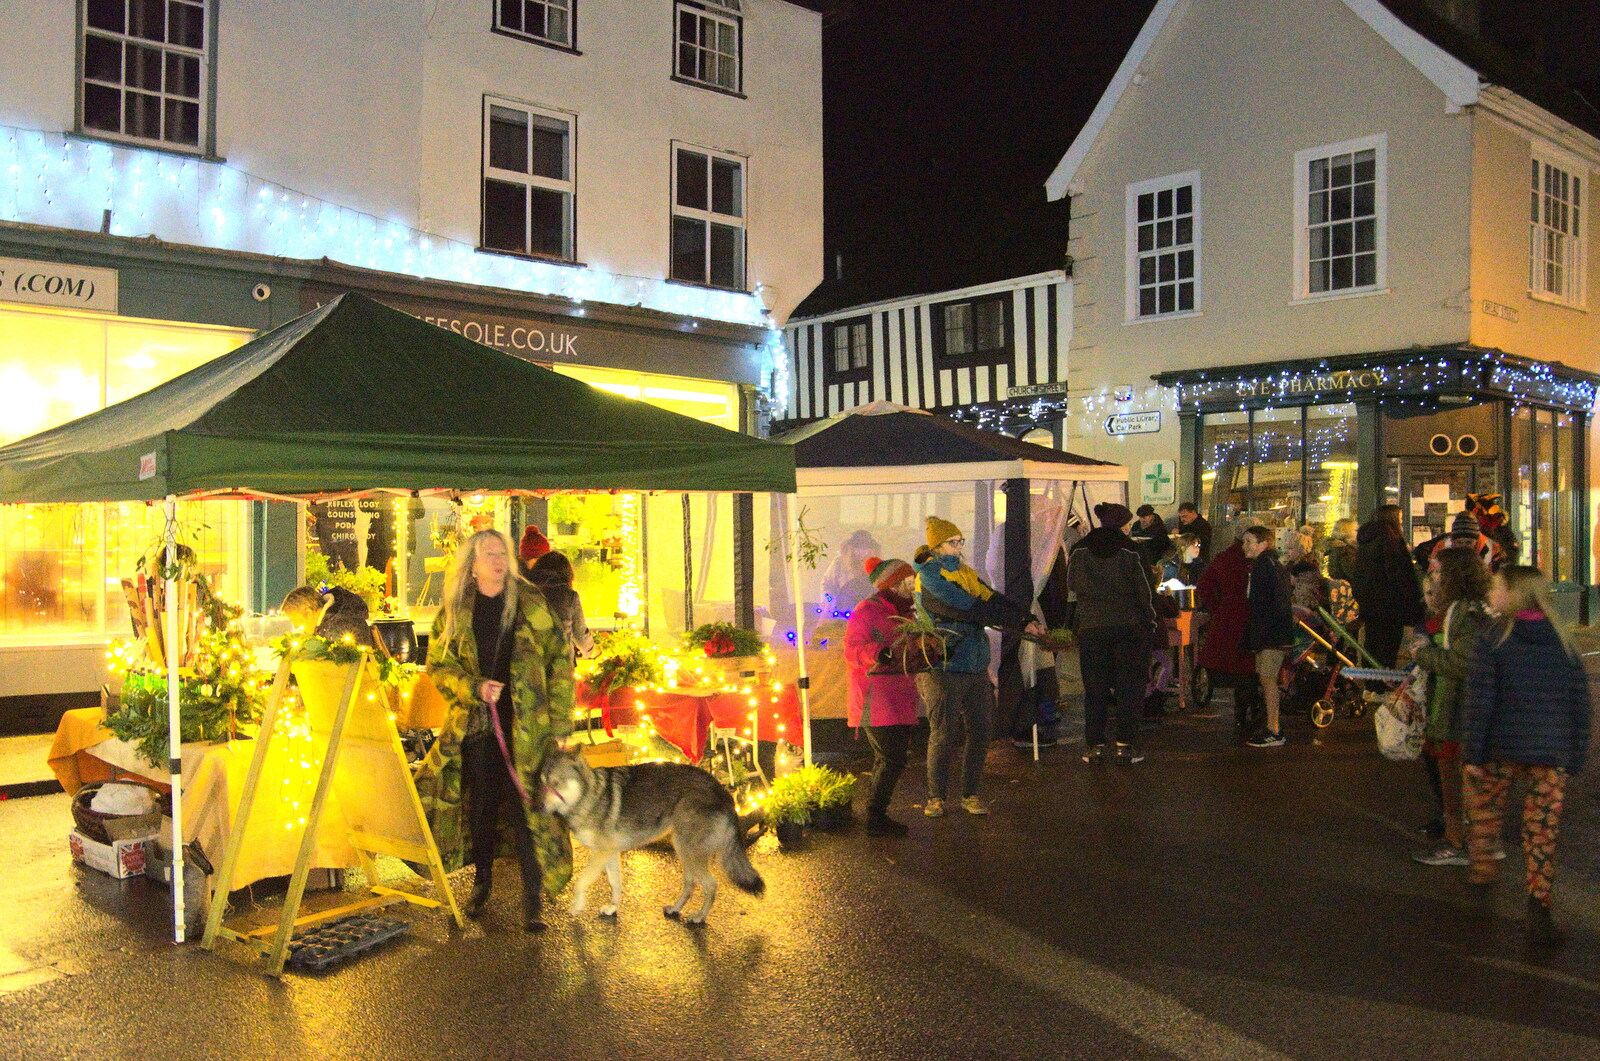 The scene in front of the Town Hall from Eye Lights and the GSB at Botesdale, Suffolk - 2nd December 2022